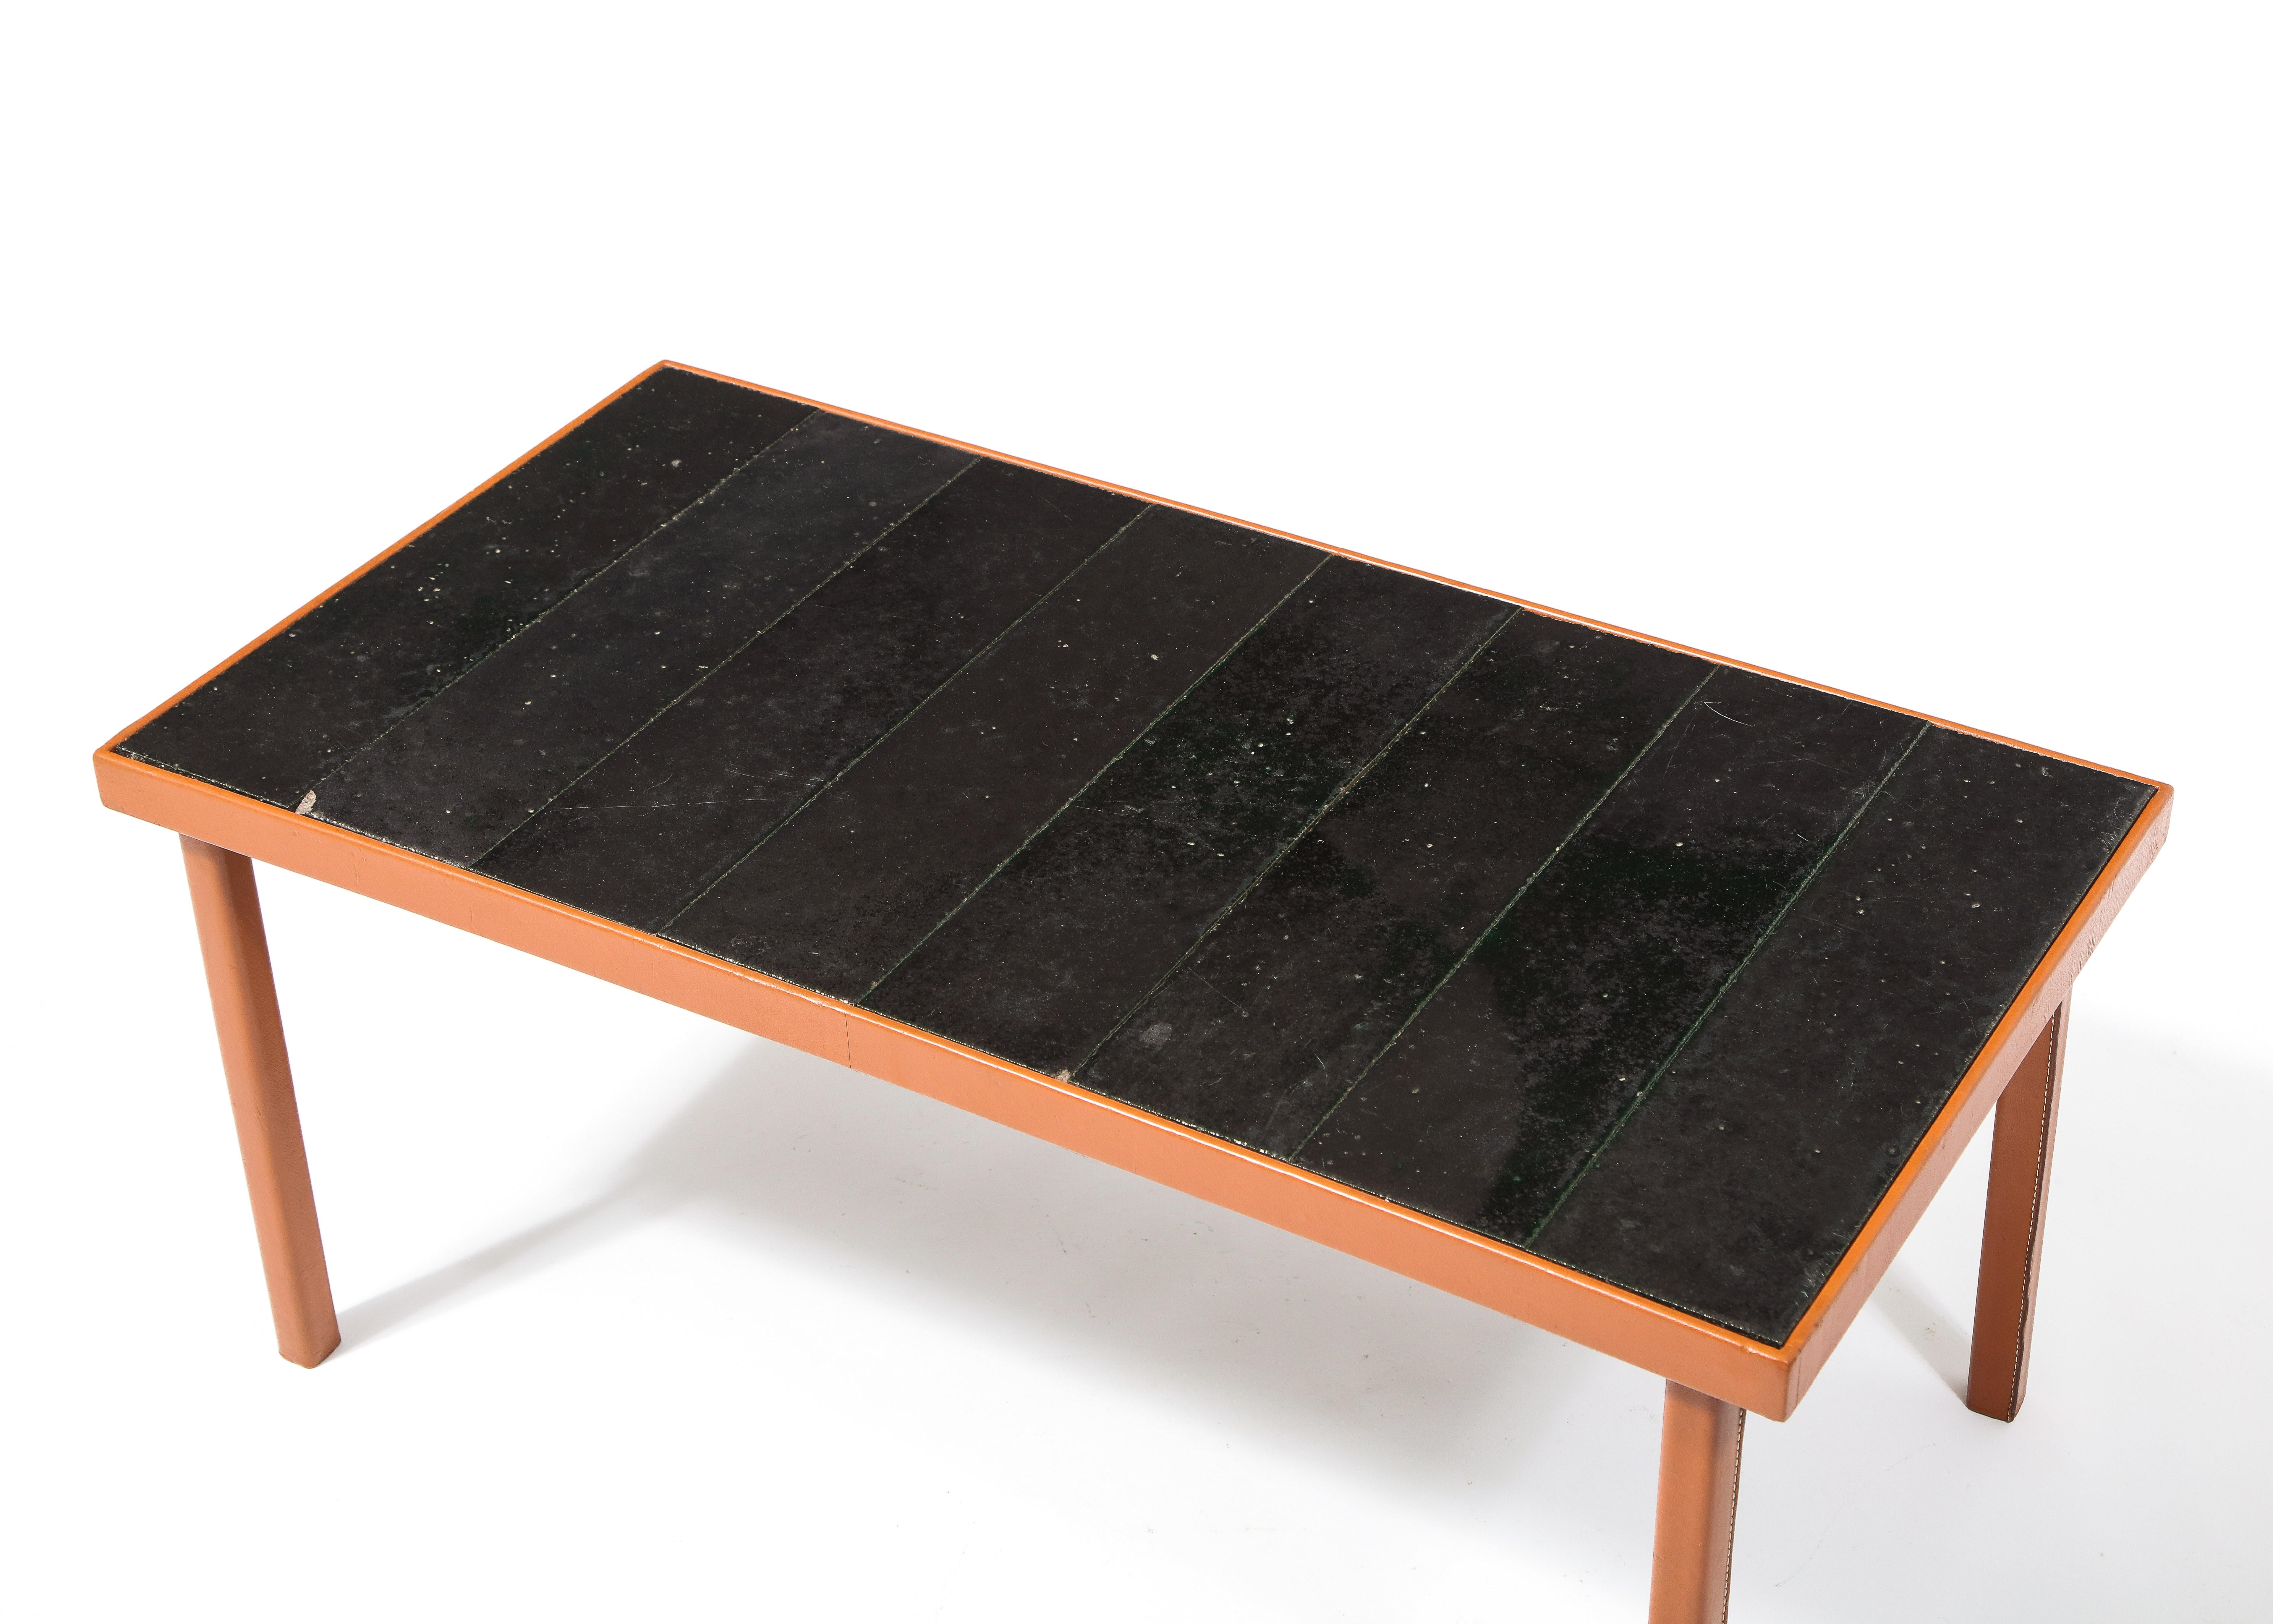 Enameled Adnet Style Leather & Dark Jouve Style Lava Stone Tiles Table, France 1950's For Sale